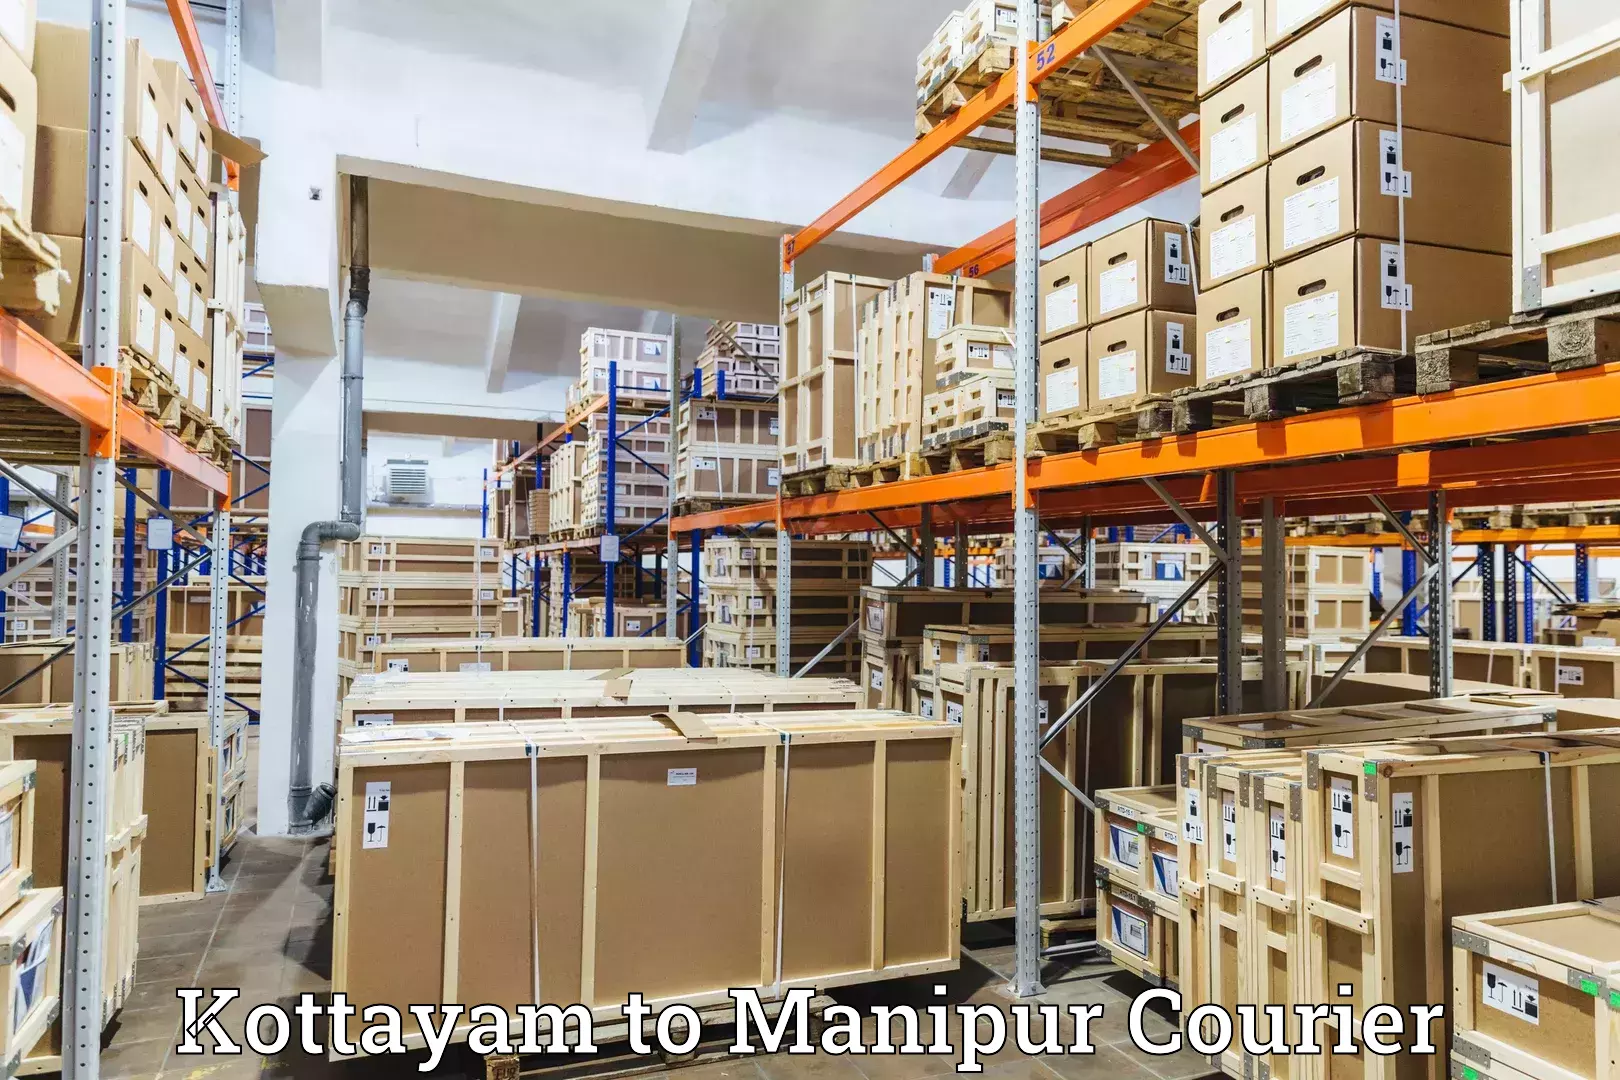 State-of-the-art courier technology Kottayam to Moirang